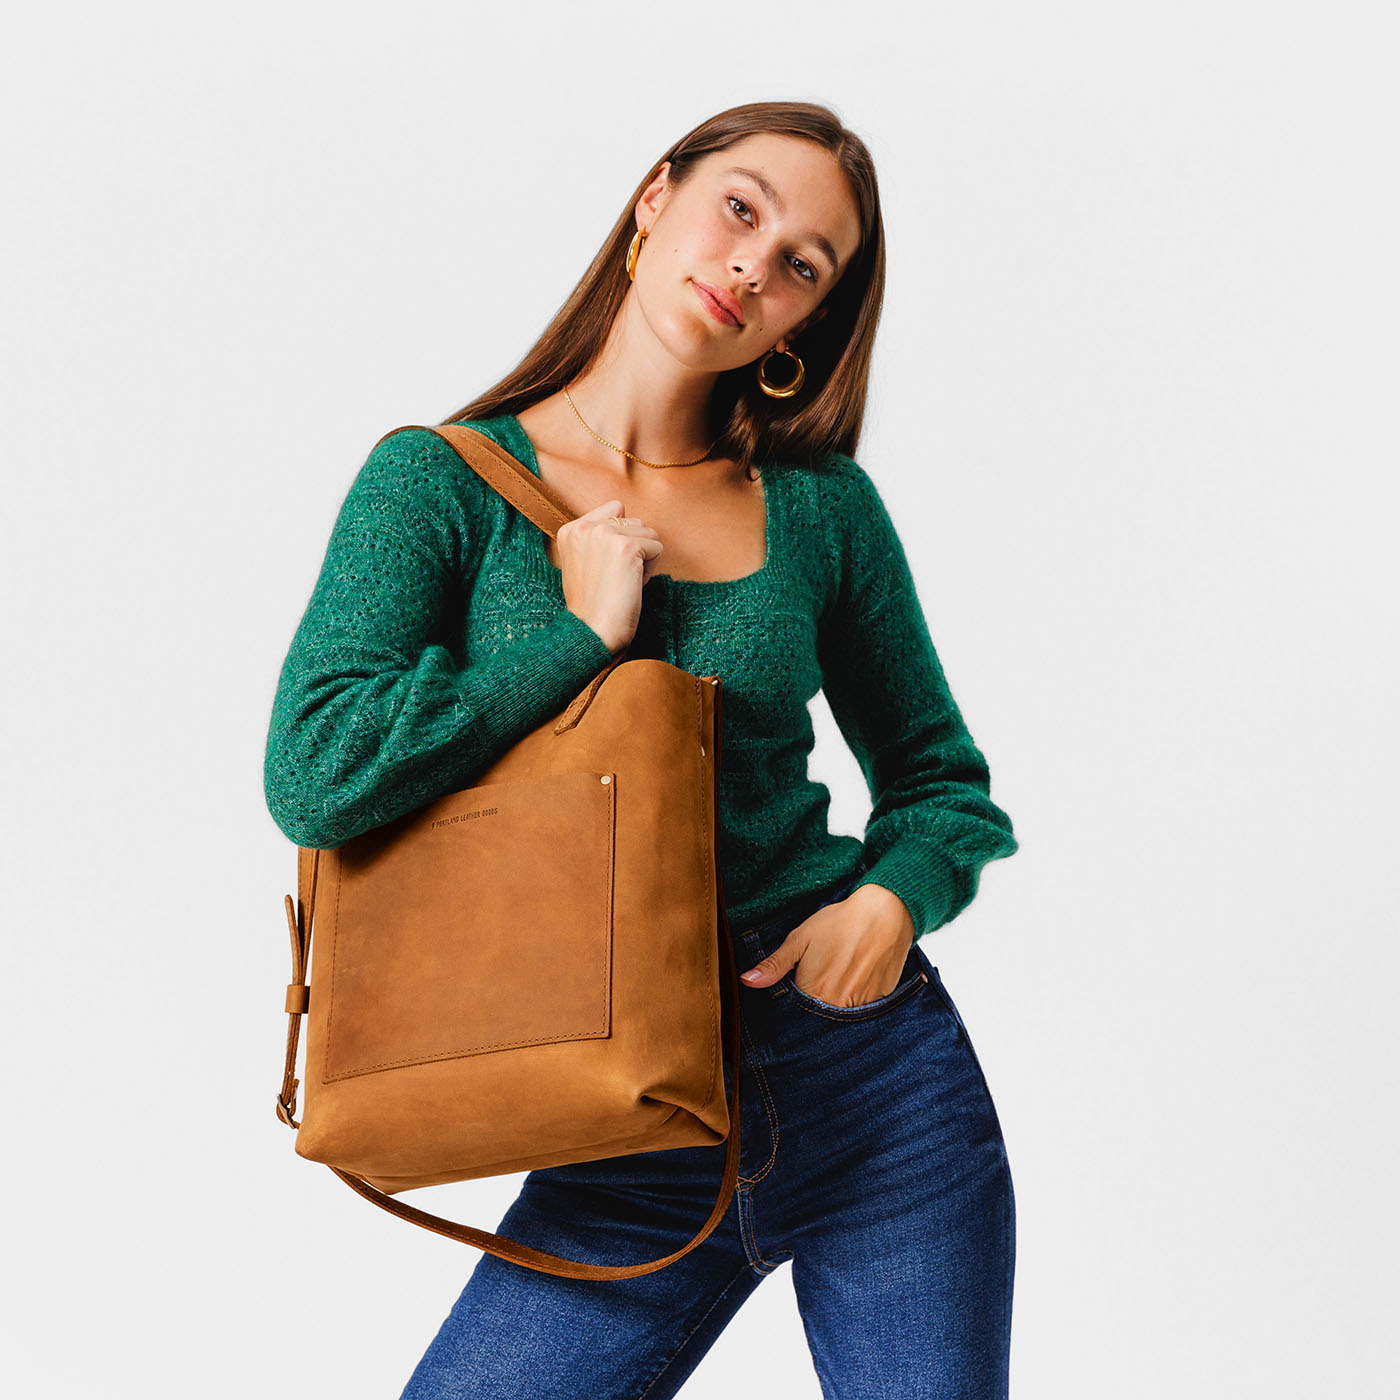 In search of the perfect crossbody bag